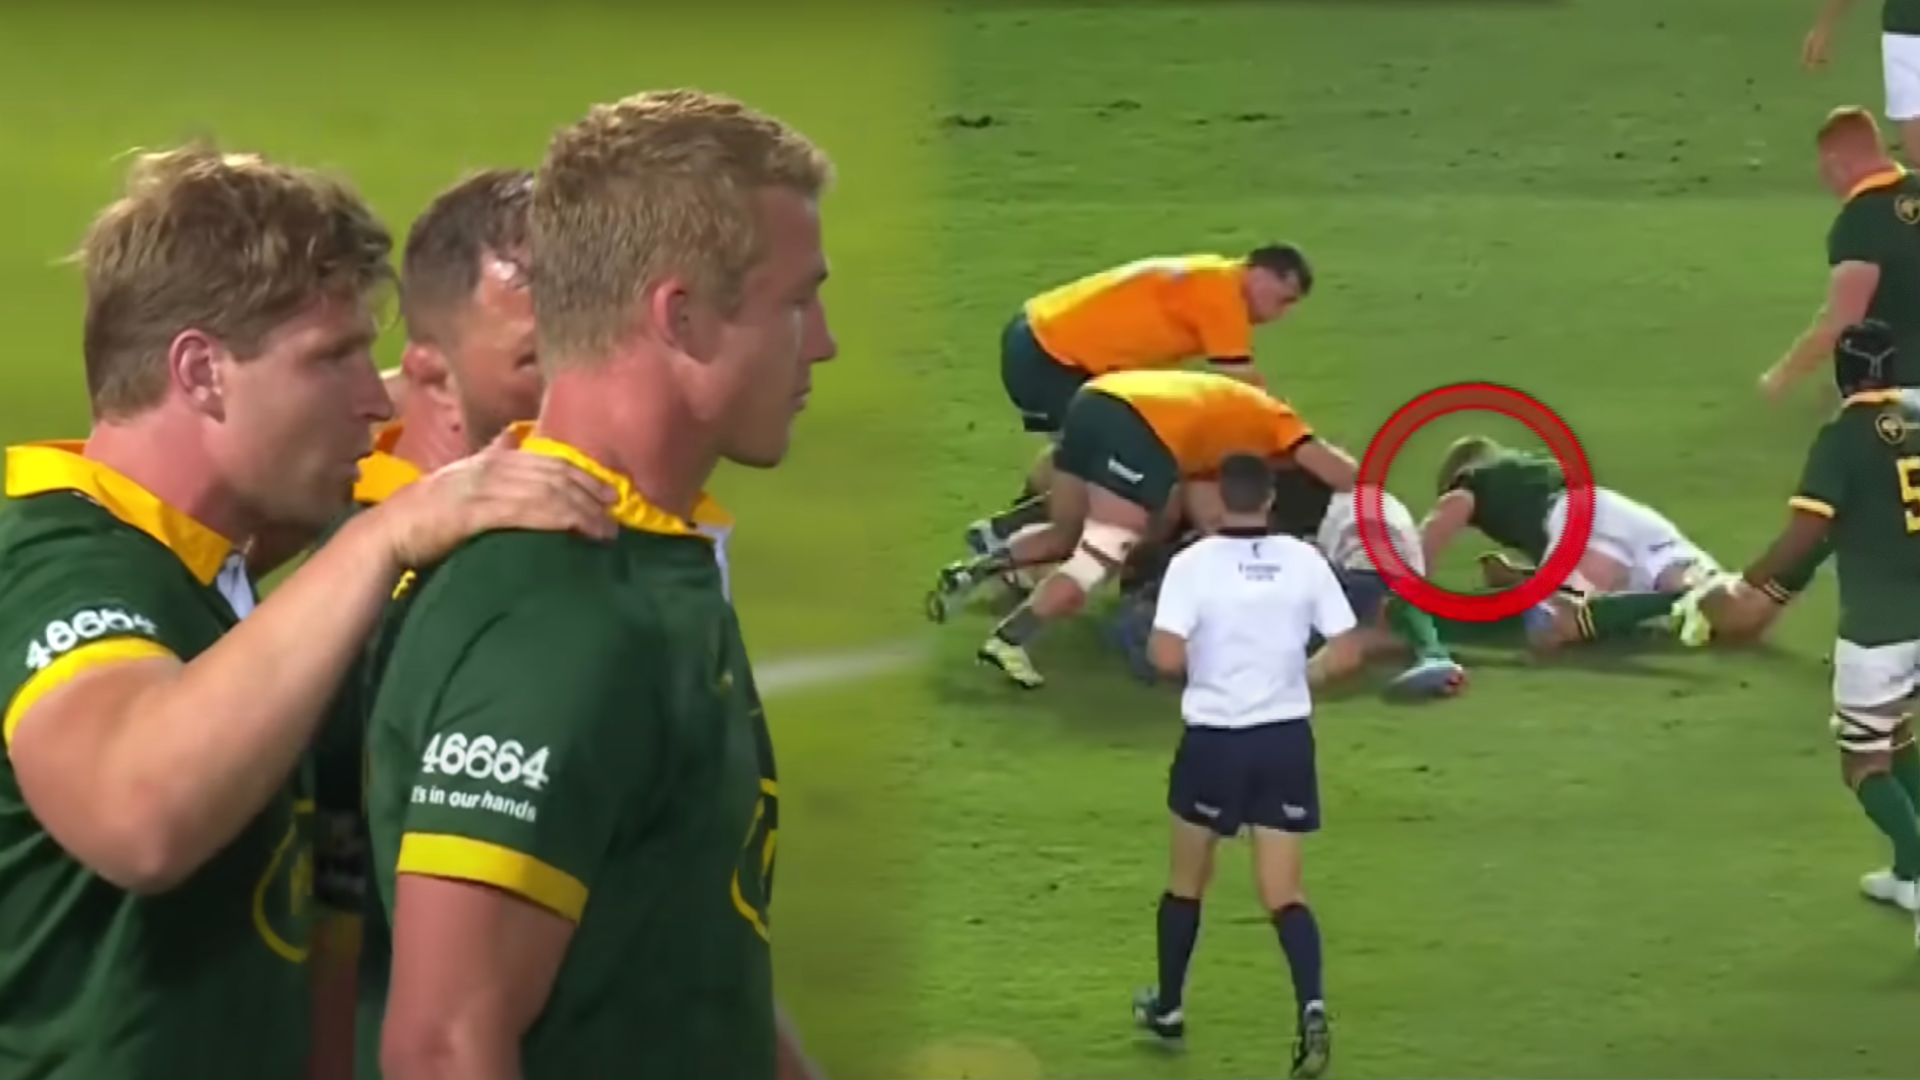 Springbok victory brought into question as clear red card for talisman is missed